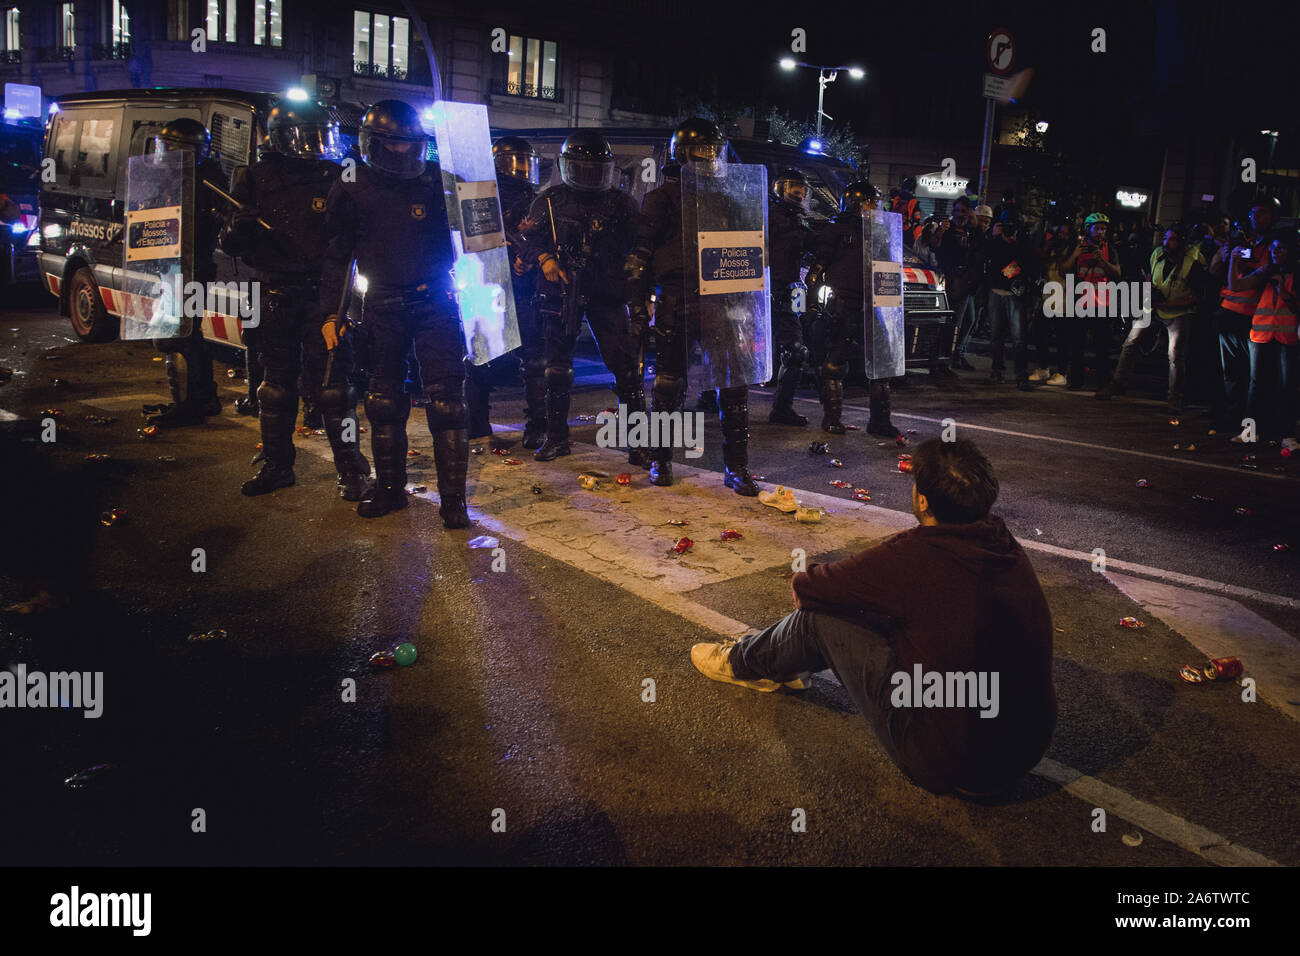 Protester sits in front of a police group during police charges in Via Laietana, Barcelona, Spain Stock Photo